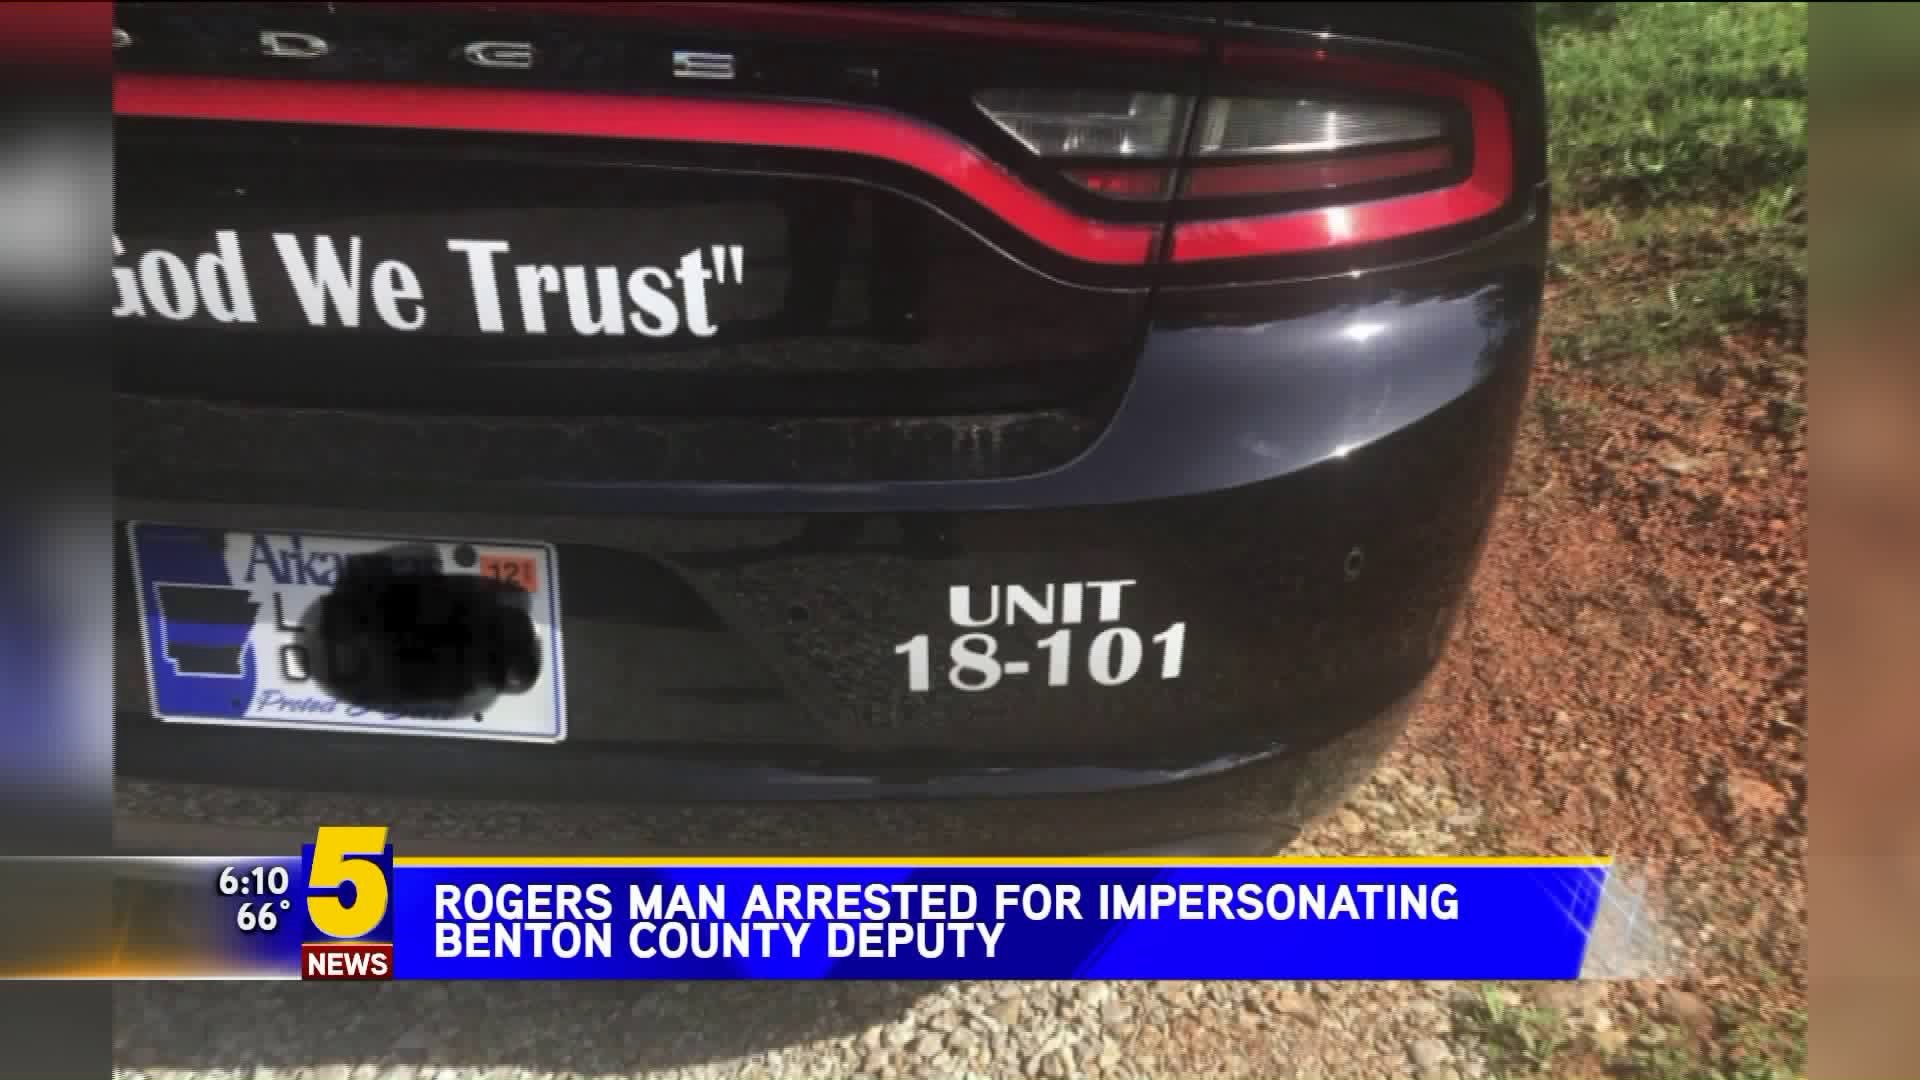 Rogers Man Arrested For Impersonating Benton County Deputy